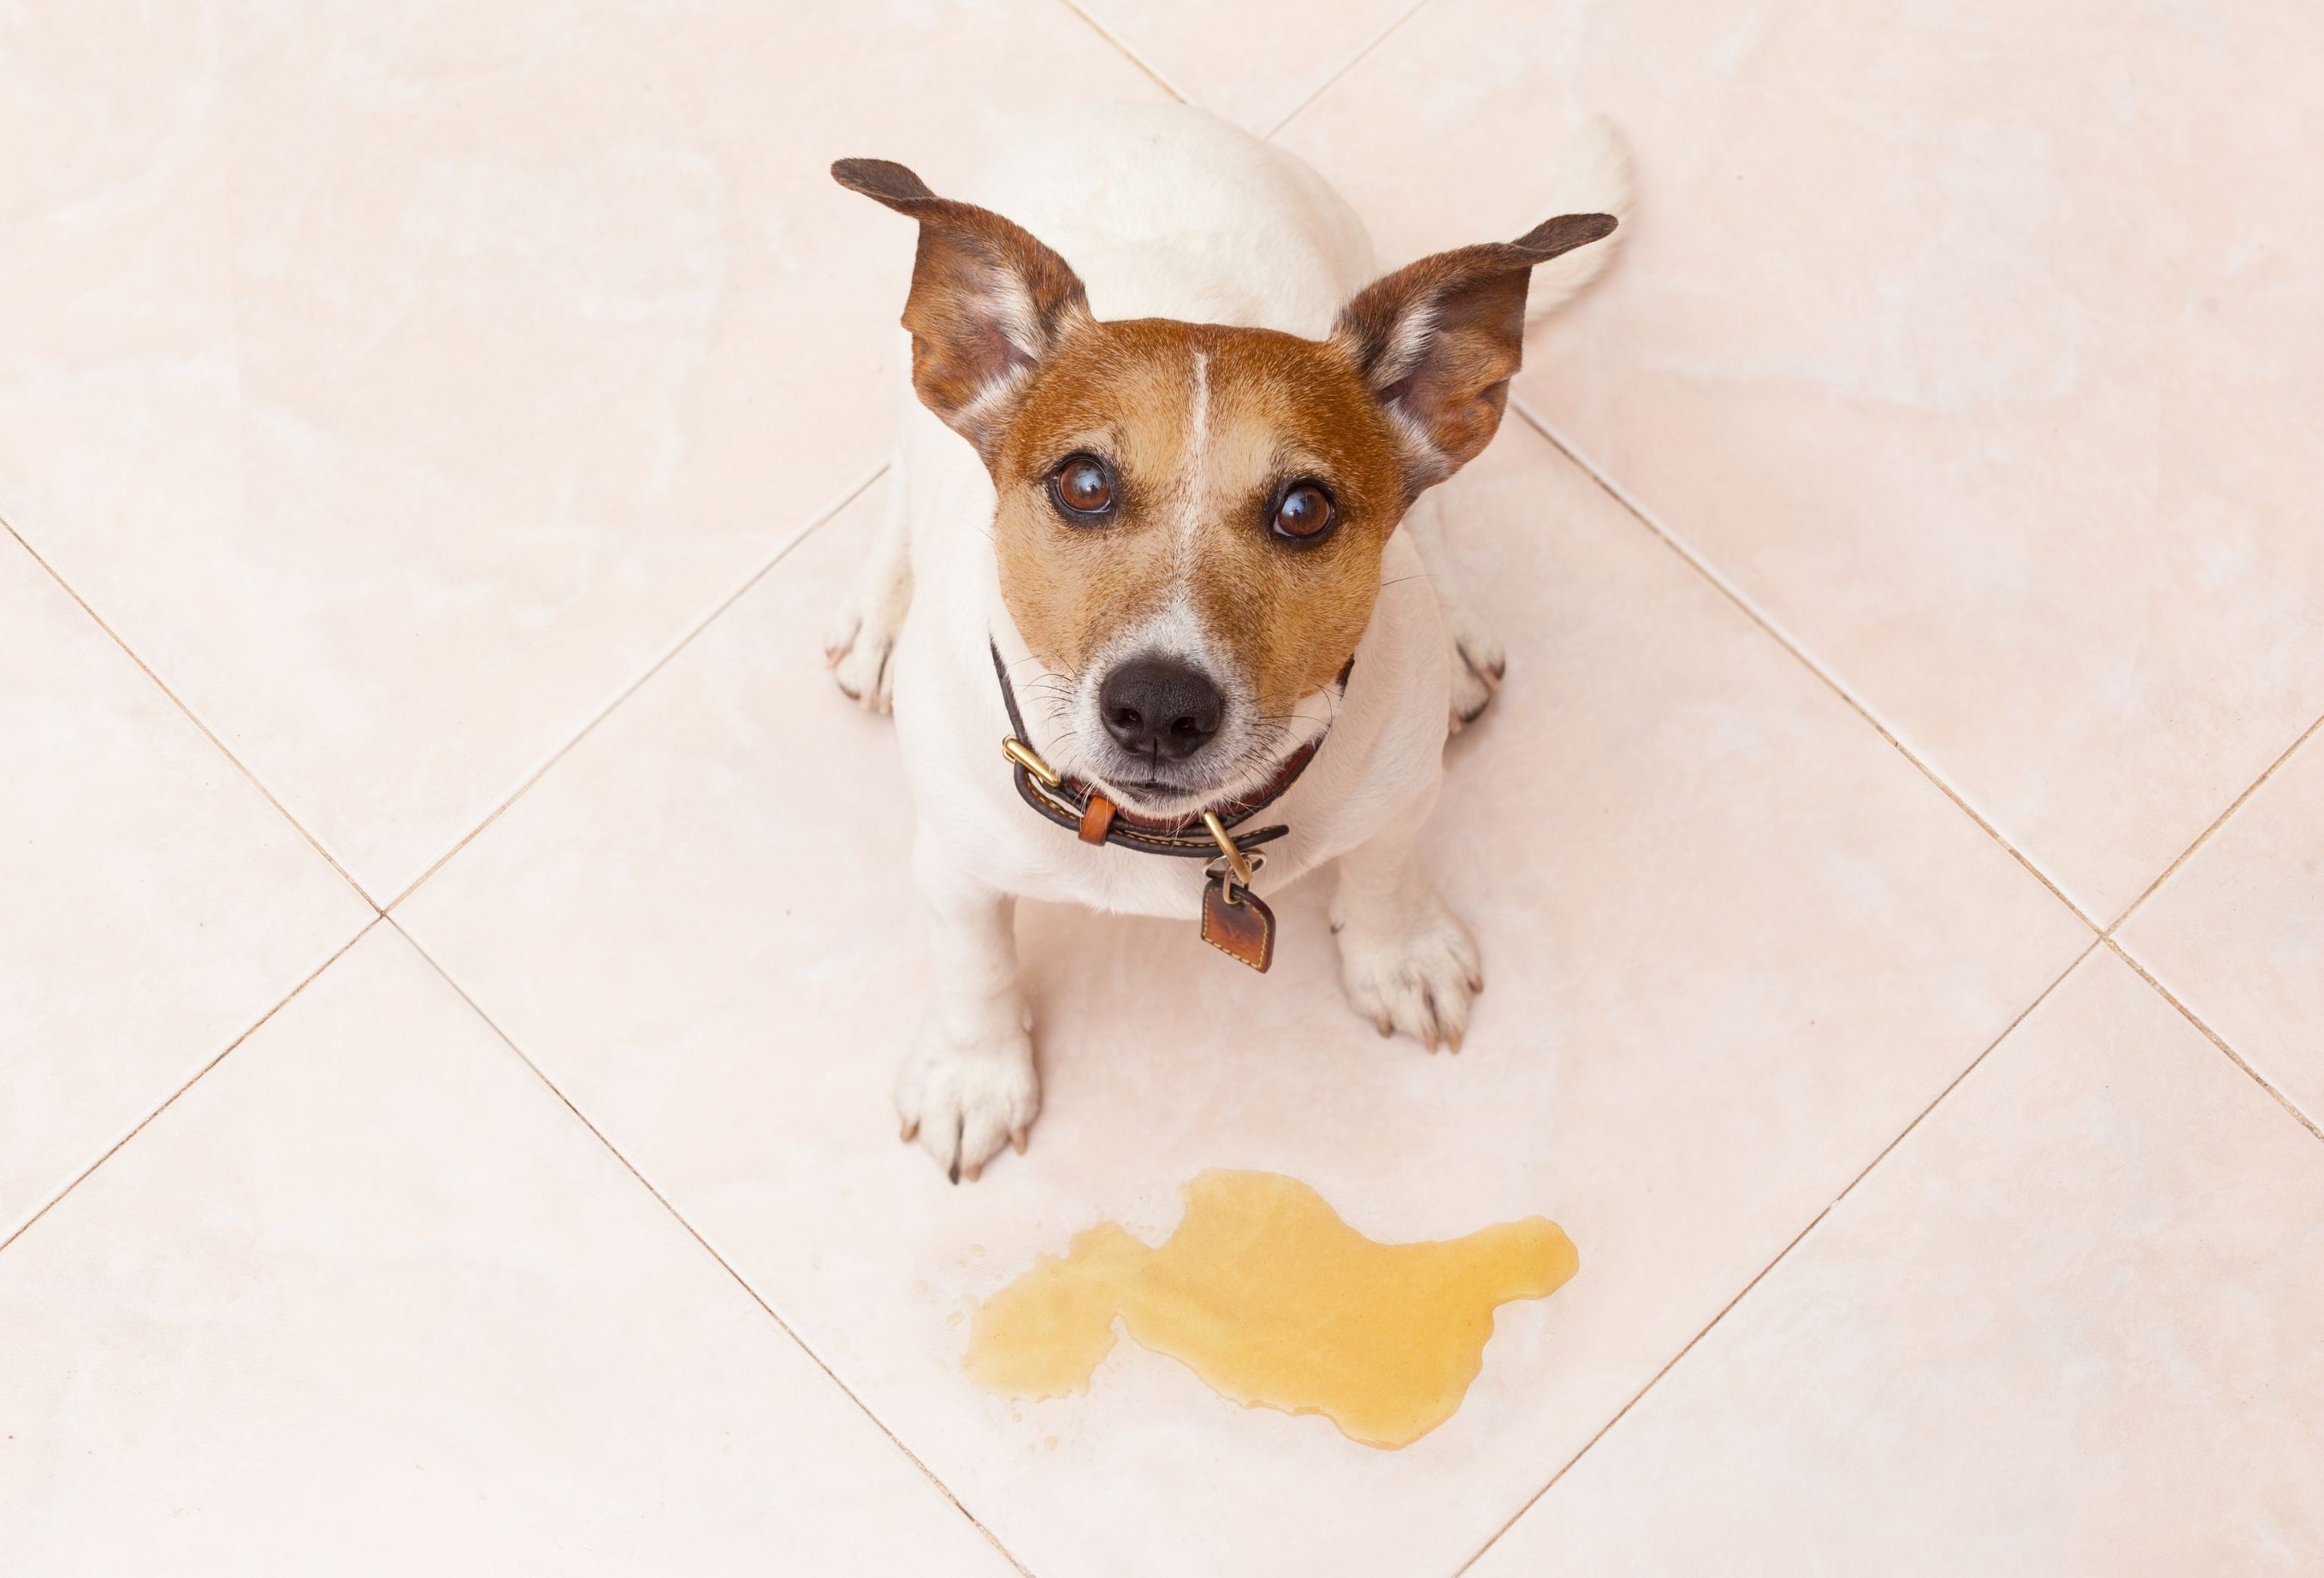 How to Stop a Dog From Peeing in the House